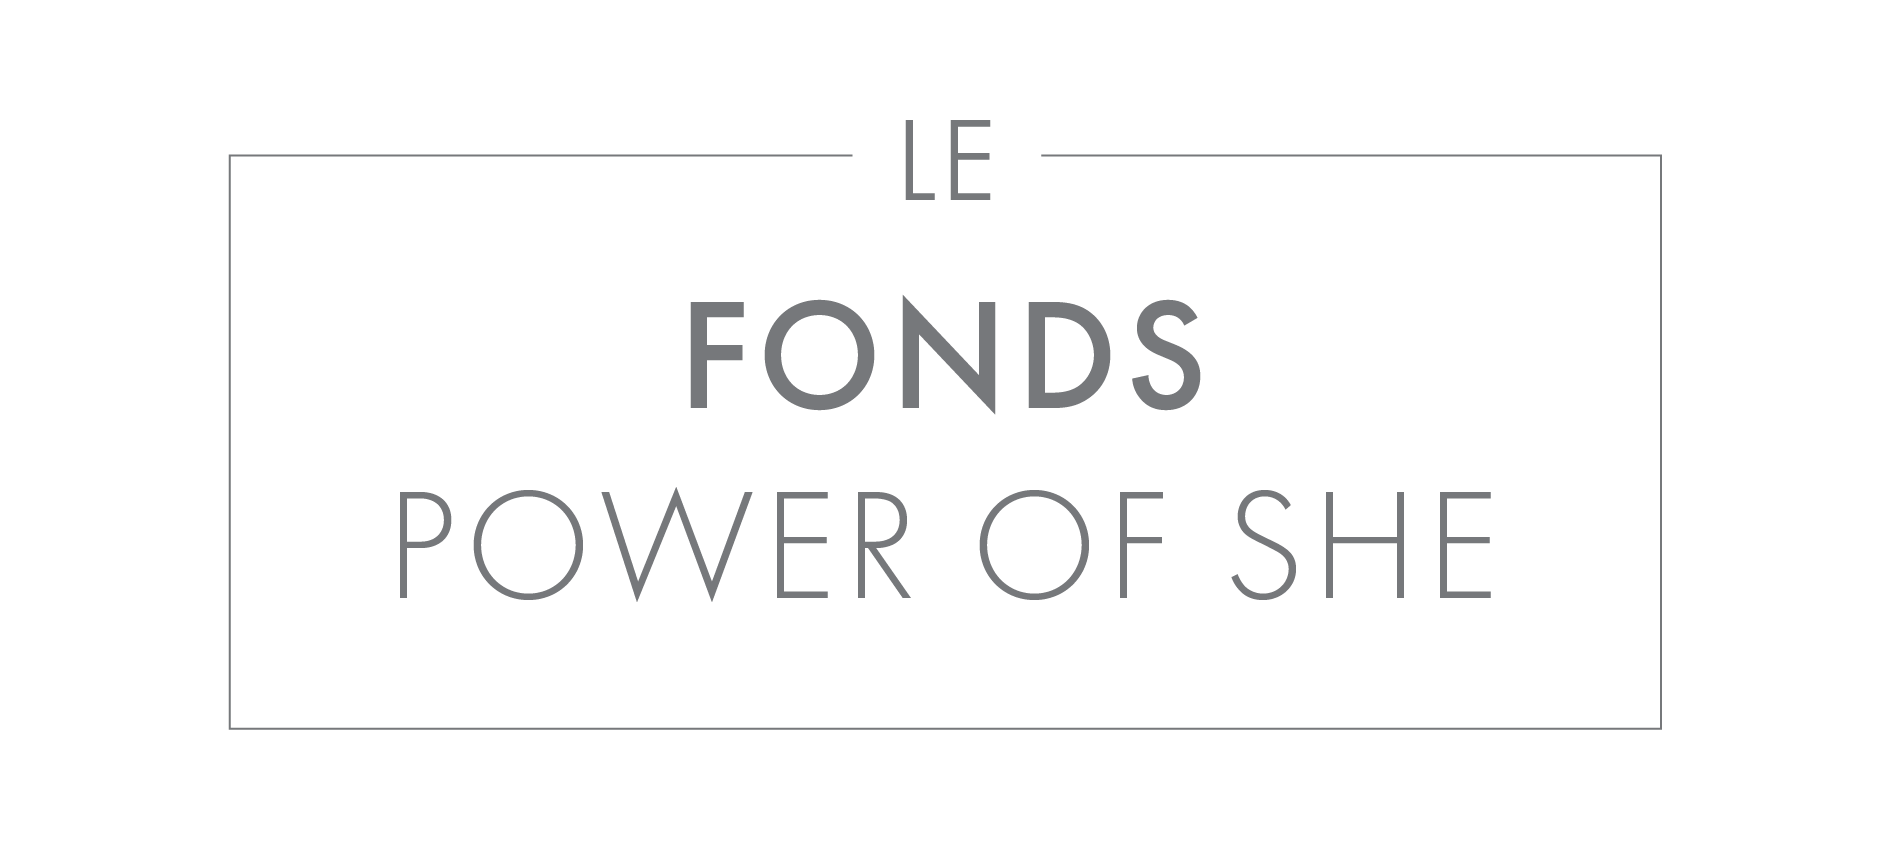 Le Power of She Fond